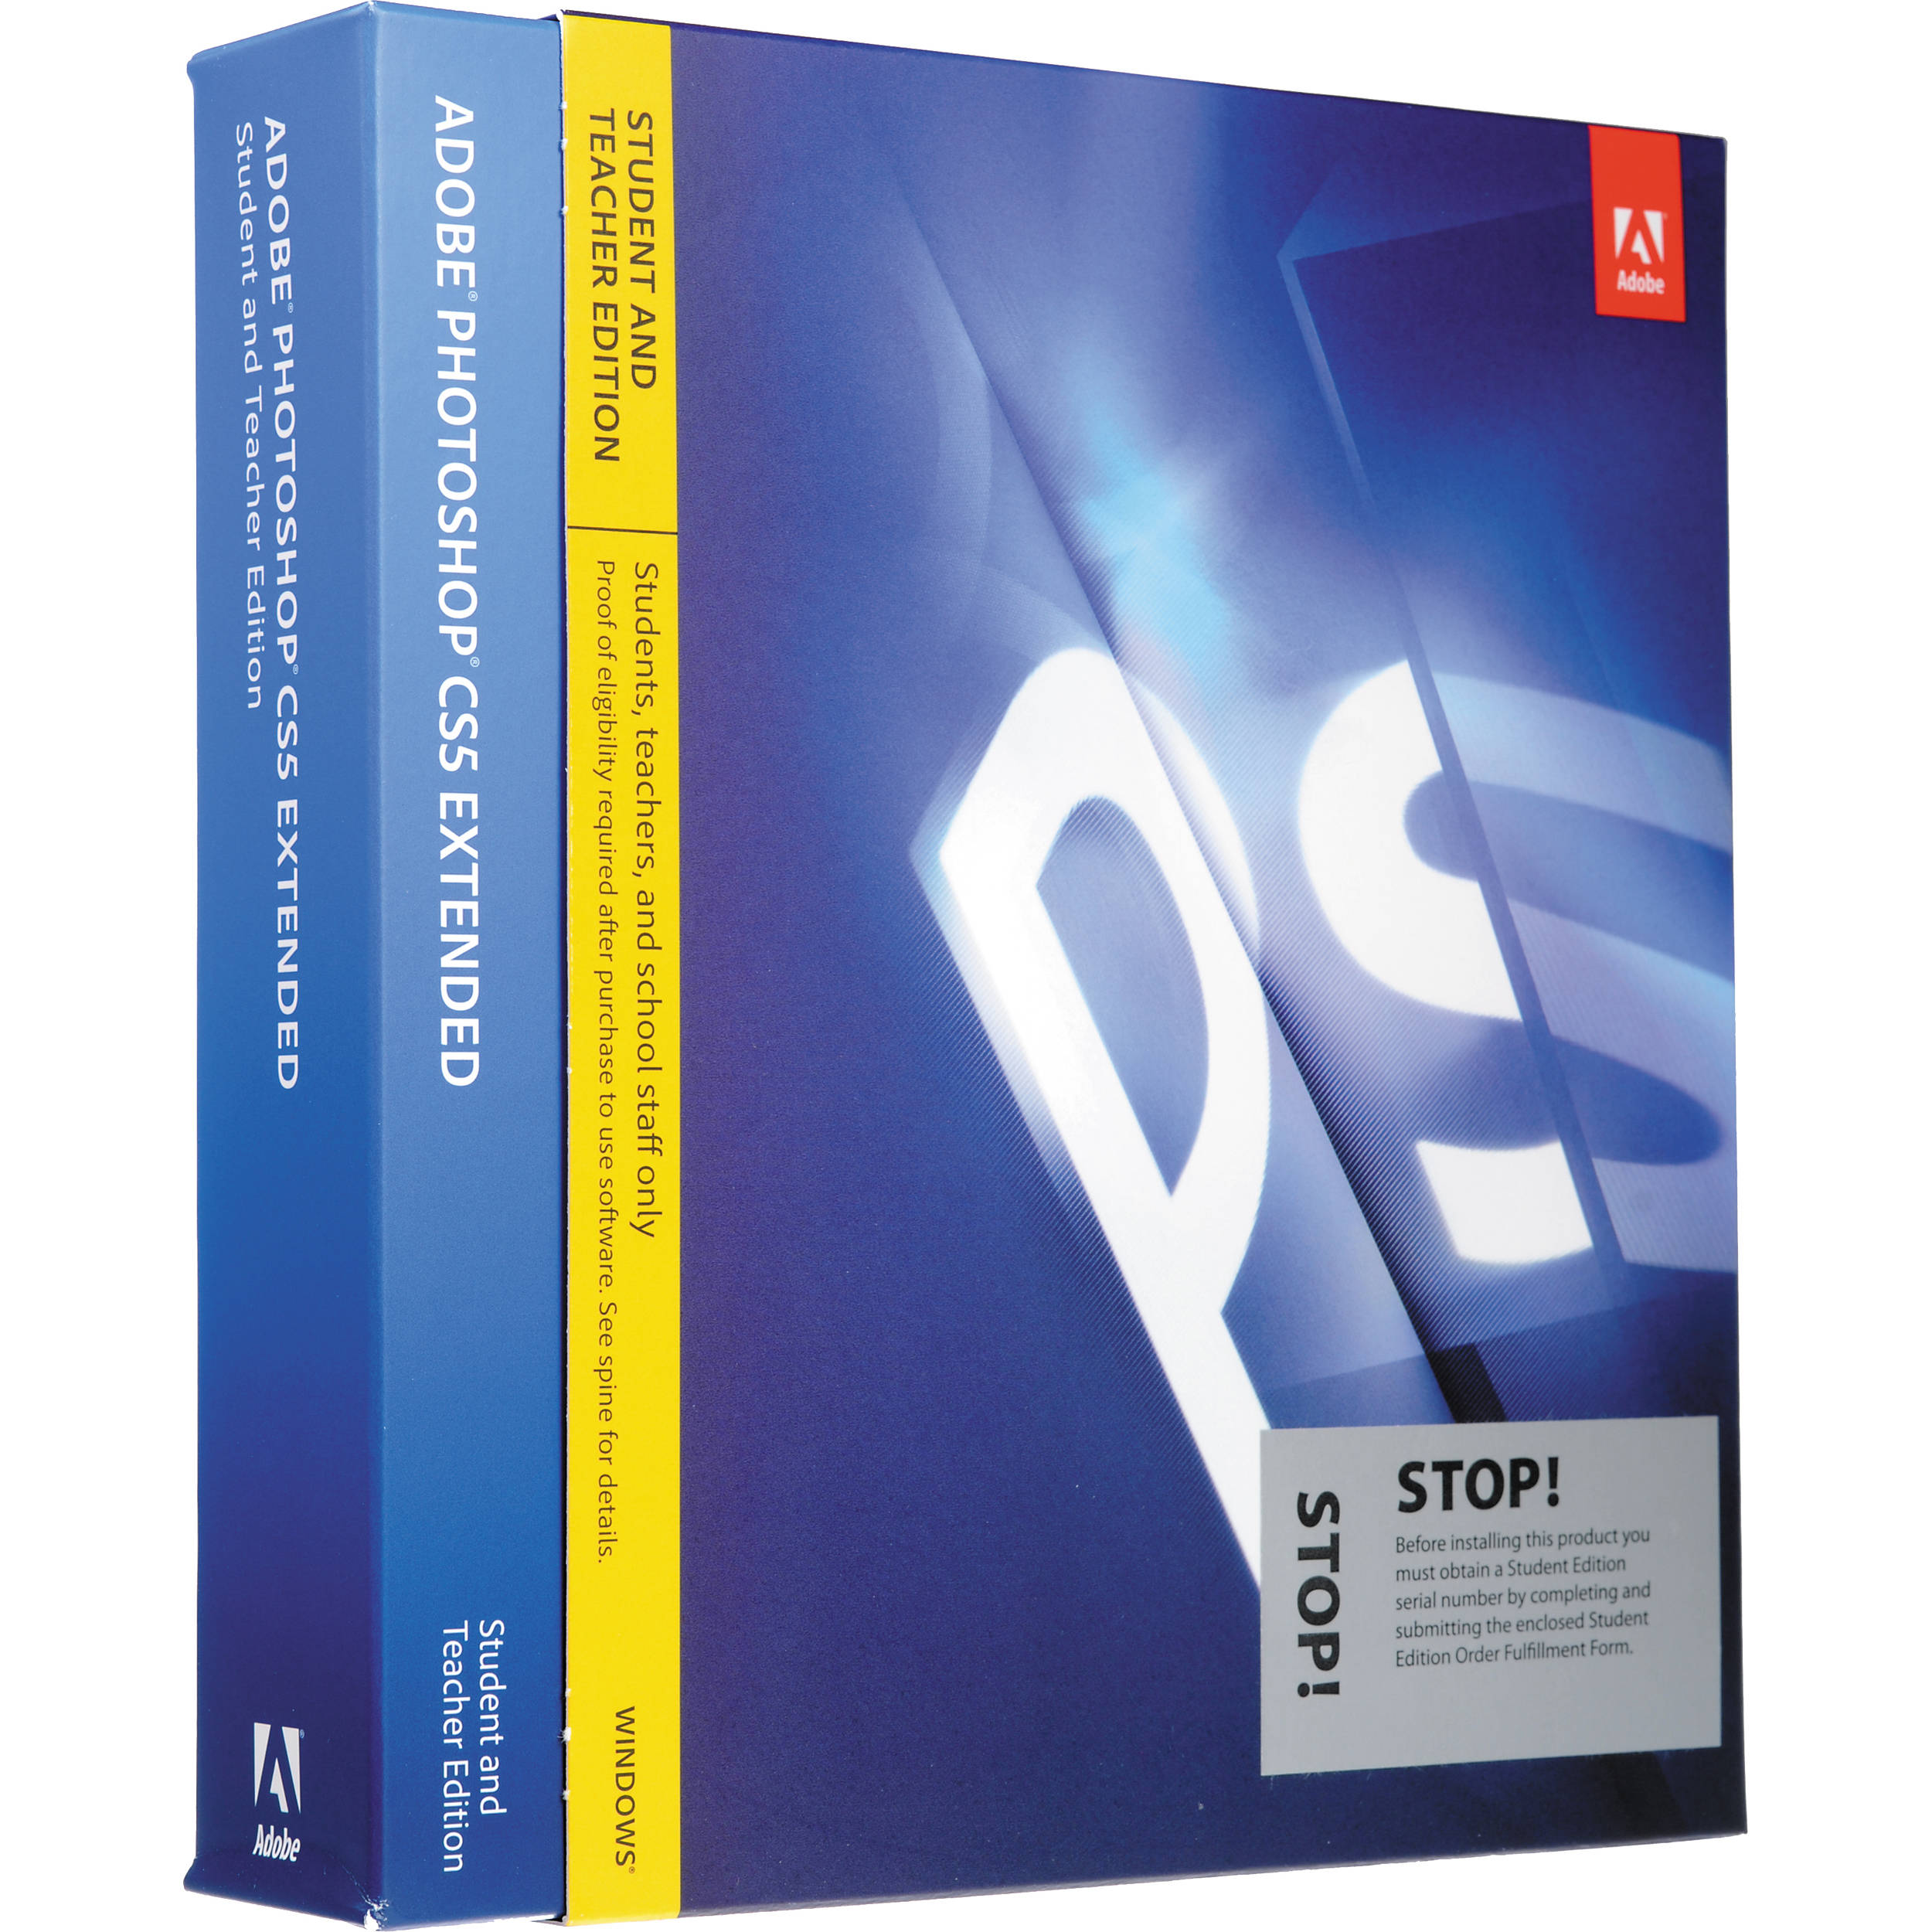 Adobe Photoshop CS5 Extended Student And Teacher Edition buy online